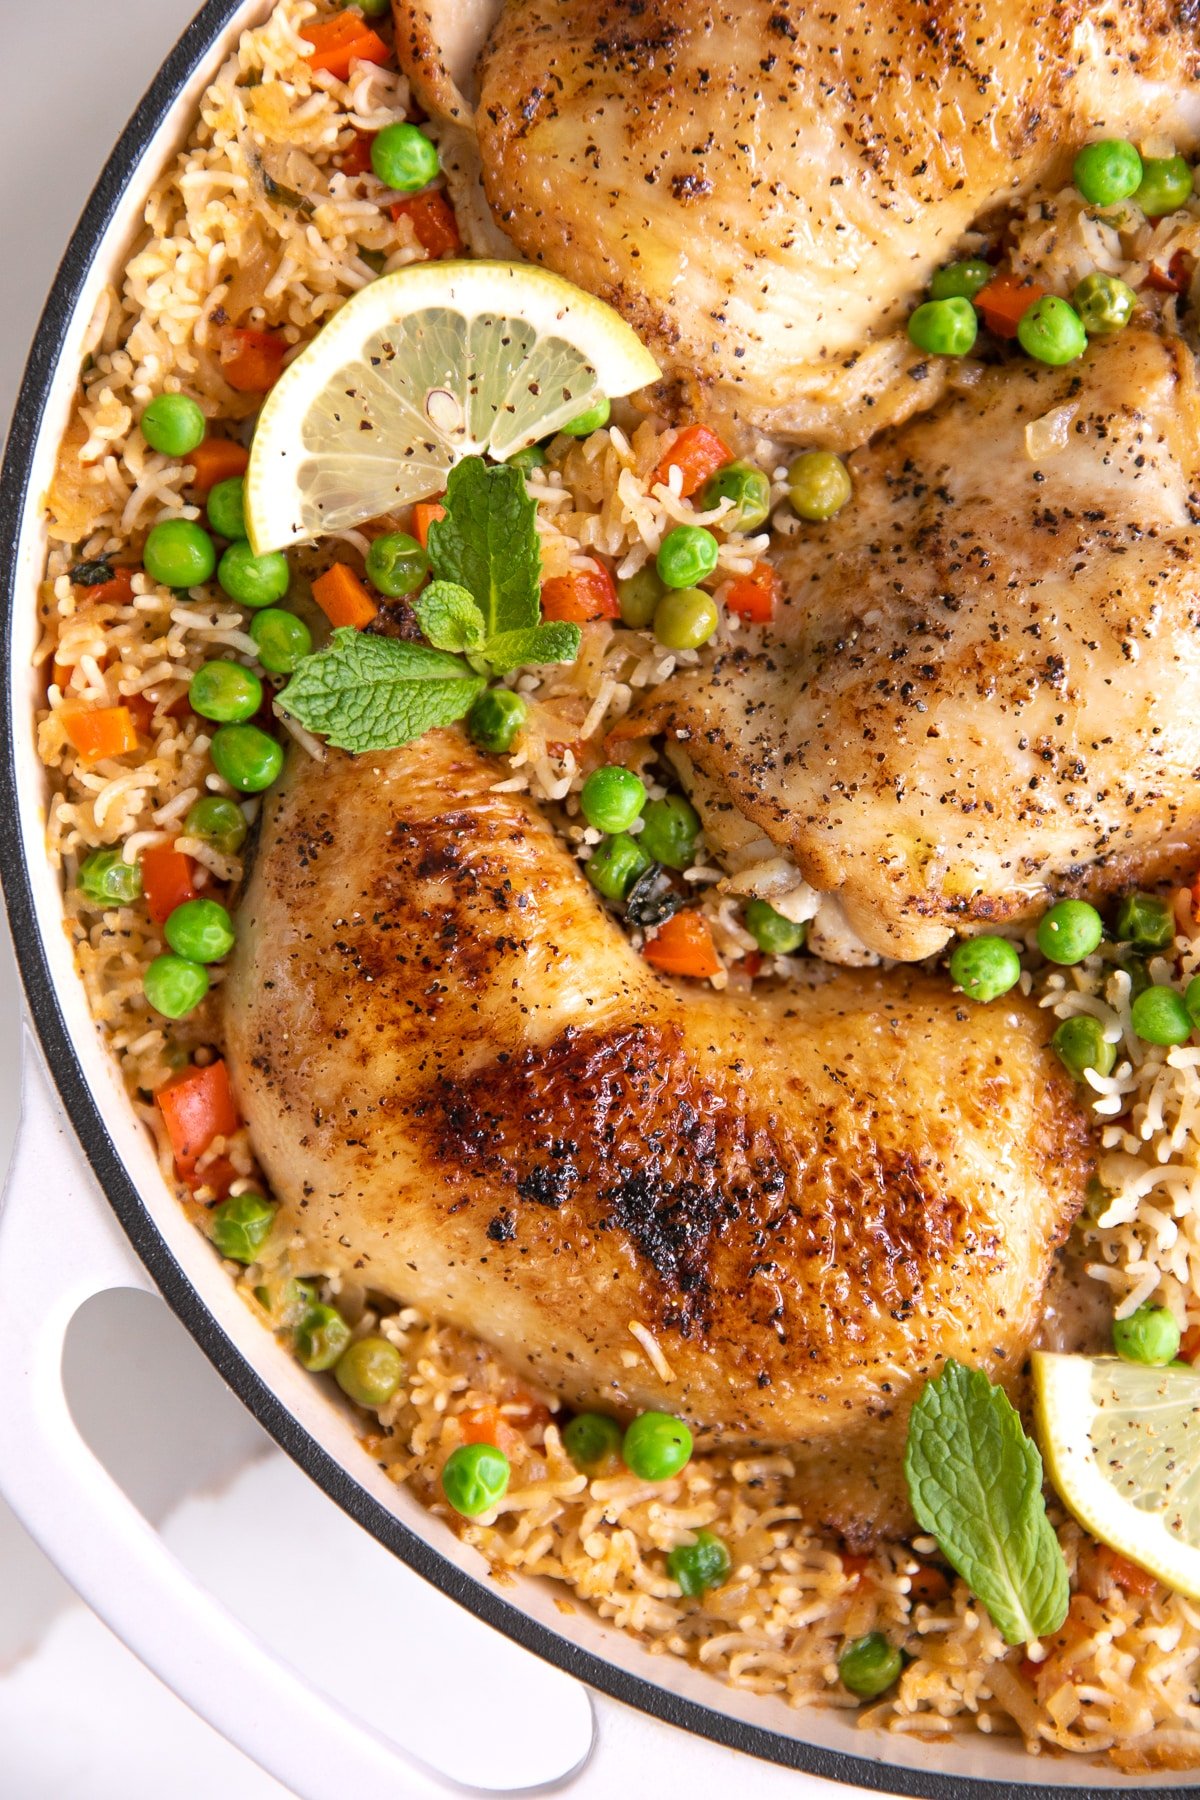 Large white skillet filled with arroz con pollo with peas and finely chopped red bell pepper and garnished with fresh mint and lemon slices.